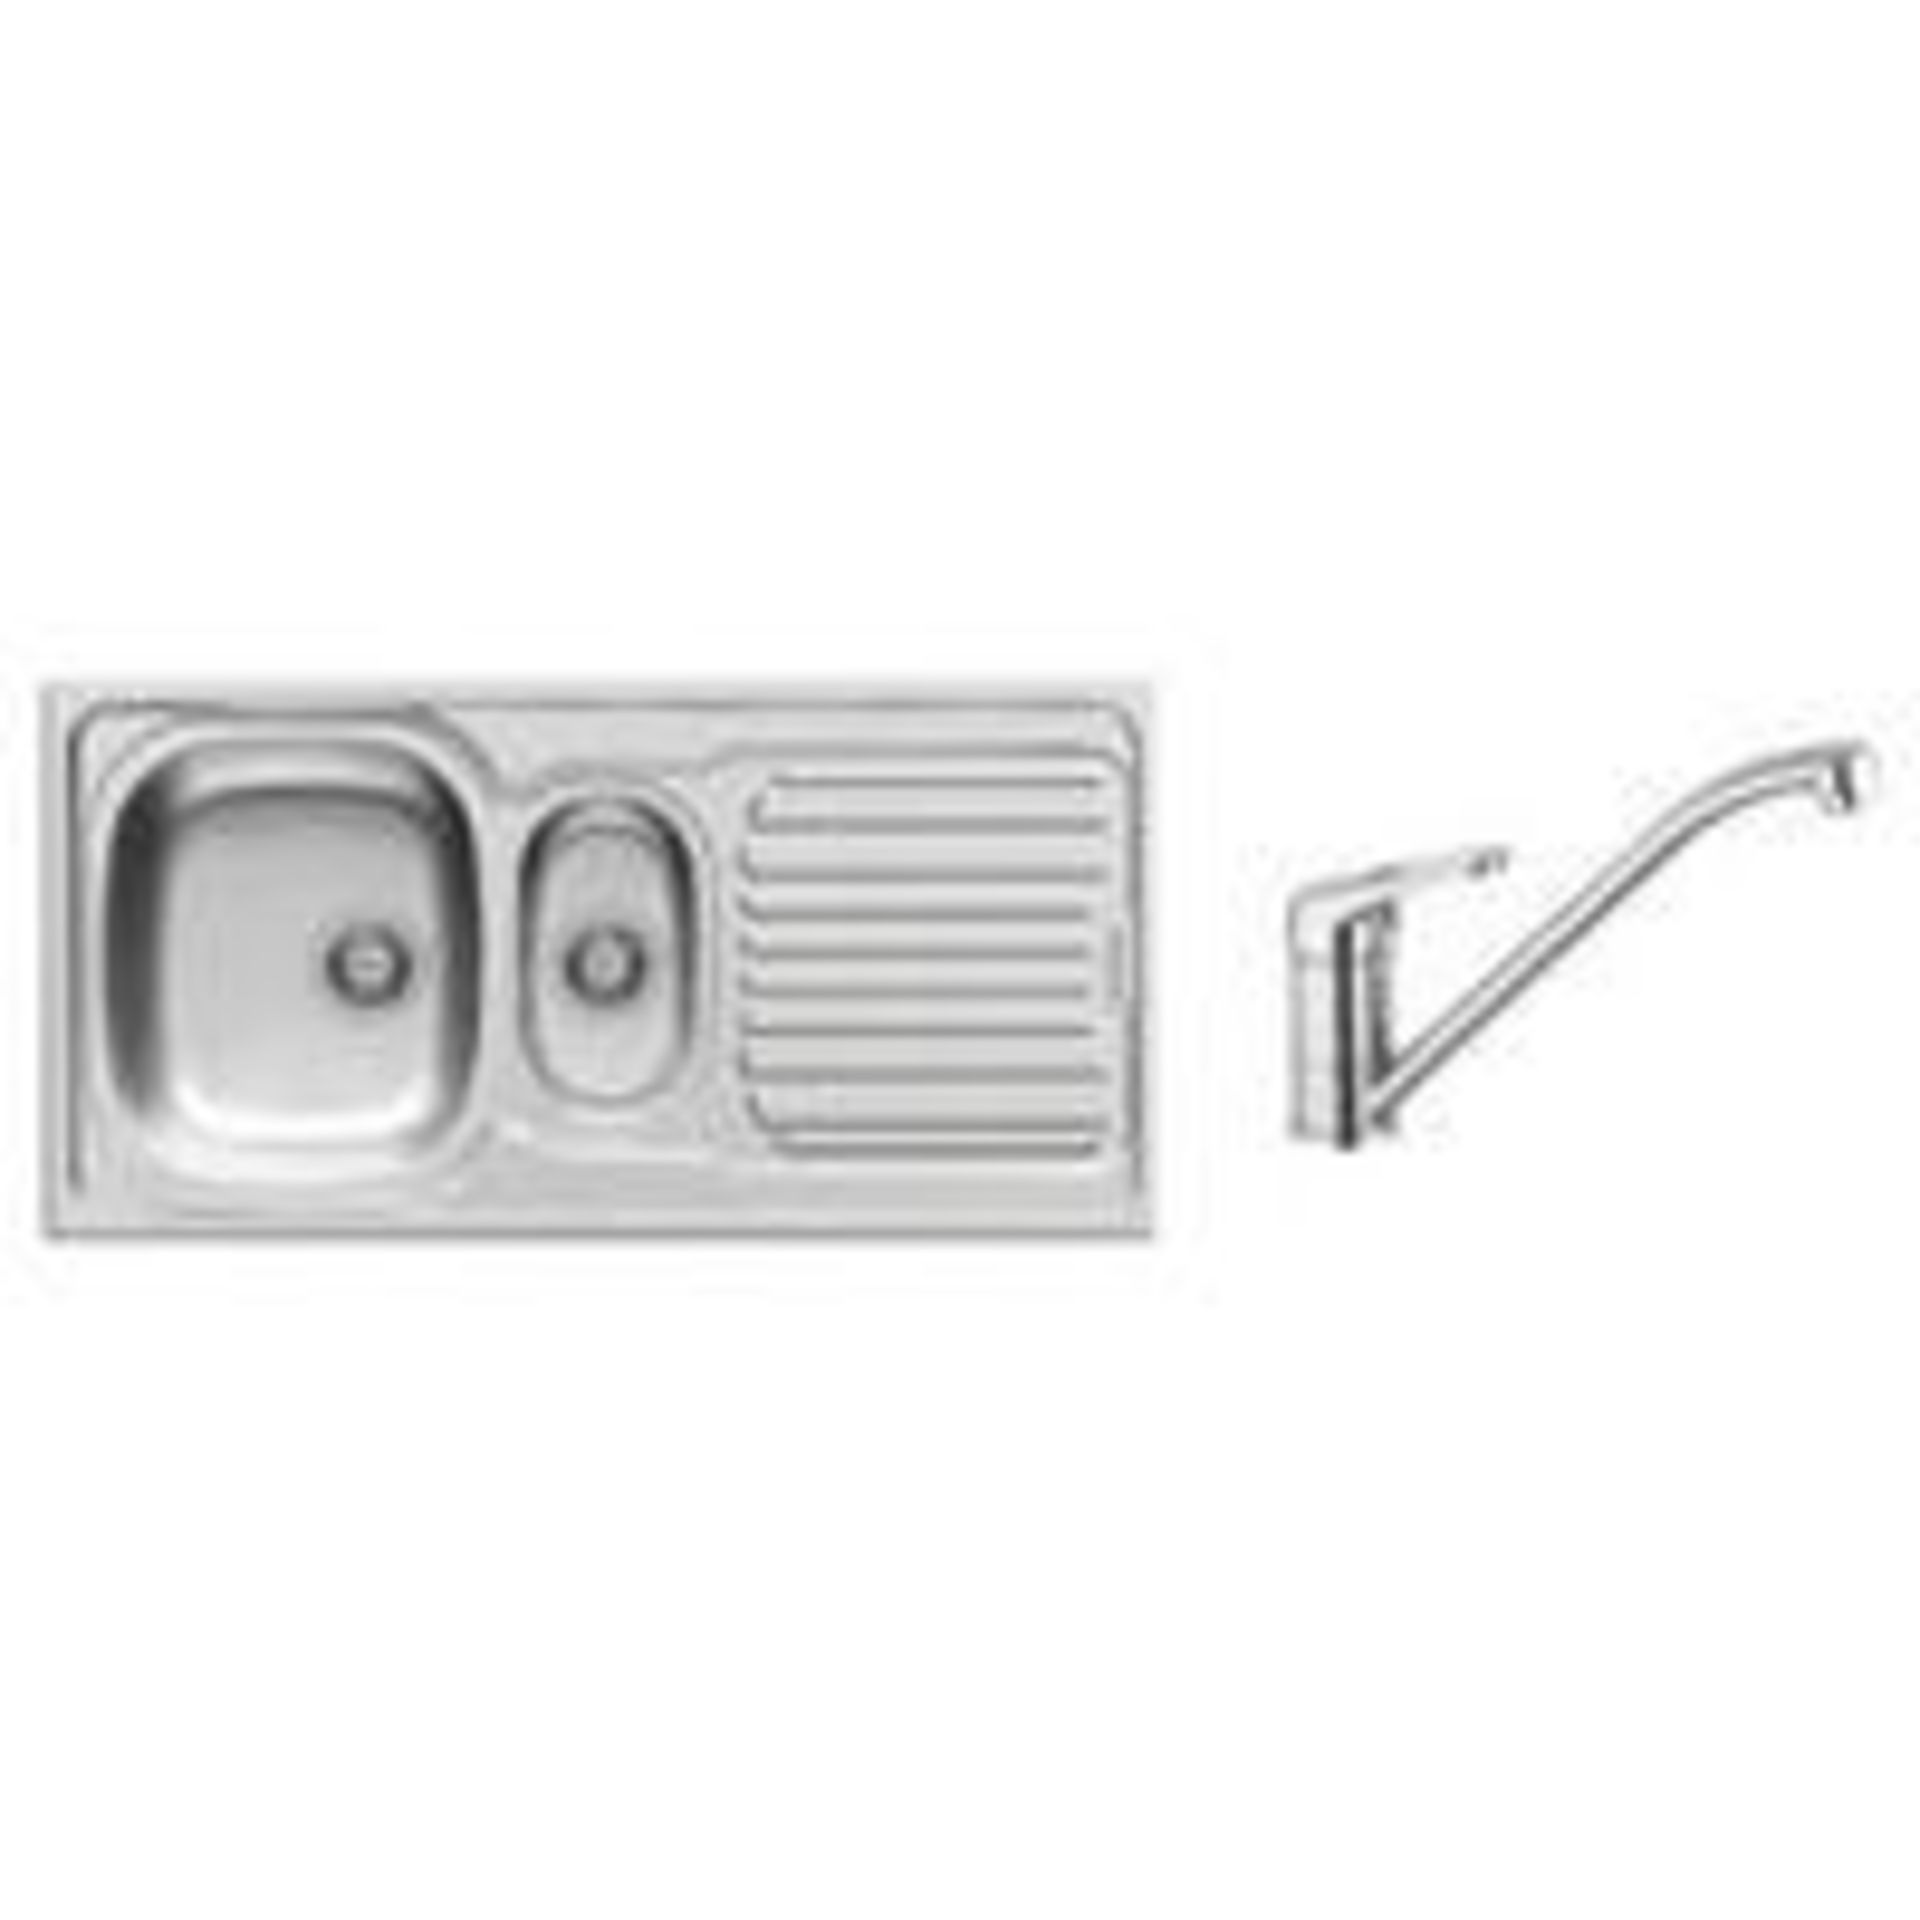 V Brand New Pyramis 1.5 Bowl Stainless Steel Sink and Tap RRP £89.99 - Image 3 of 3